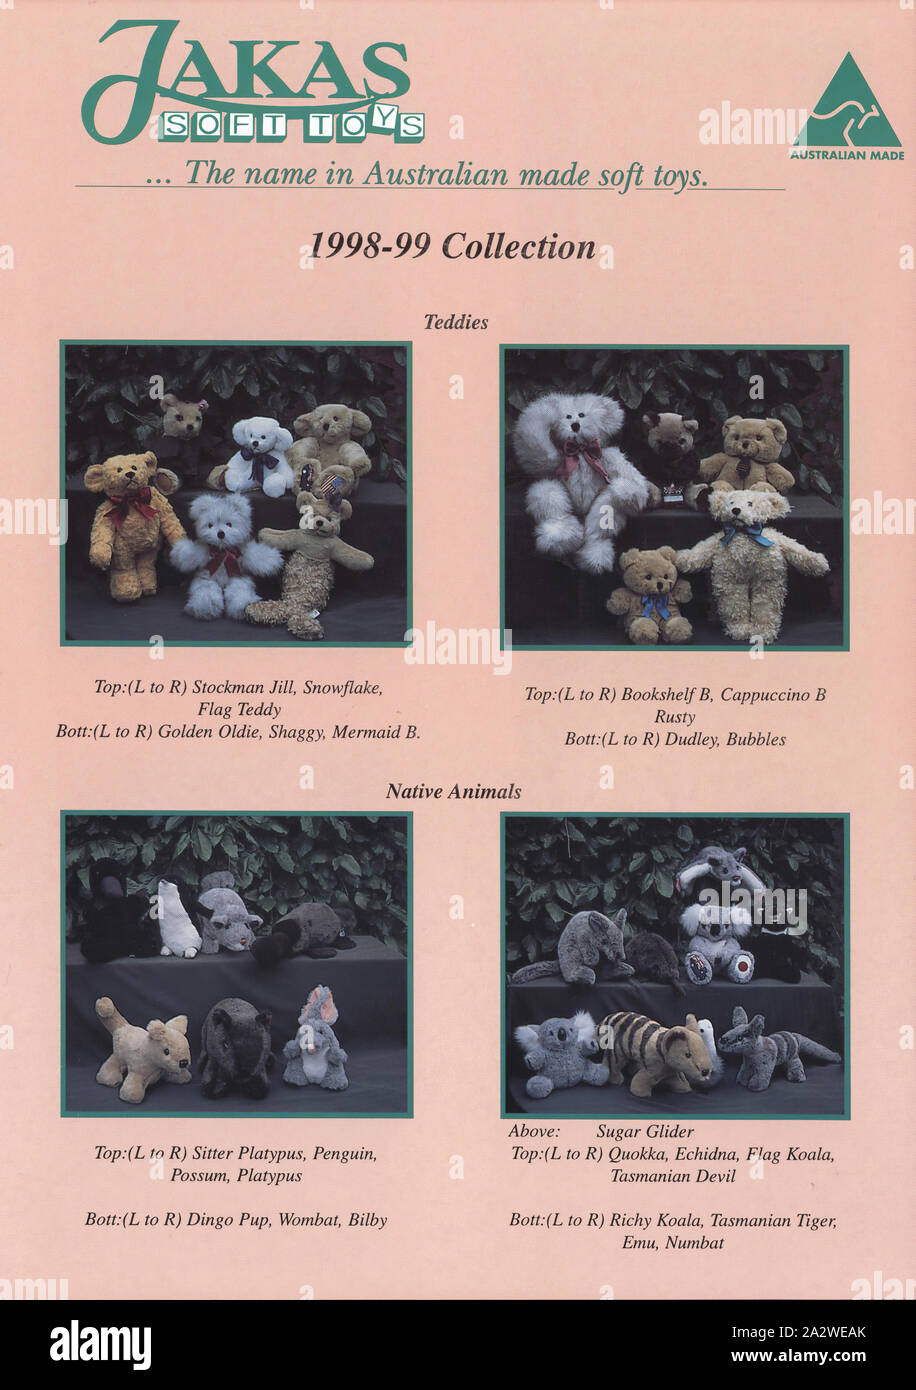 Catalogue - Jakas Soft Toys, Melbourne, 1998-1999, Jakas Soft Toys 1998-99 catalogue. The four-page catalogue shows colour images of the various soft toys available in the current collection. The soft toys are grouped into teddies, native animals, birds, dolphins, whales and hand puppets. Special 'jointed' teddies are featured along with a group of 'golly' doll designs. Available sizes and colours are shown, along with care instructions for Stock Photo